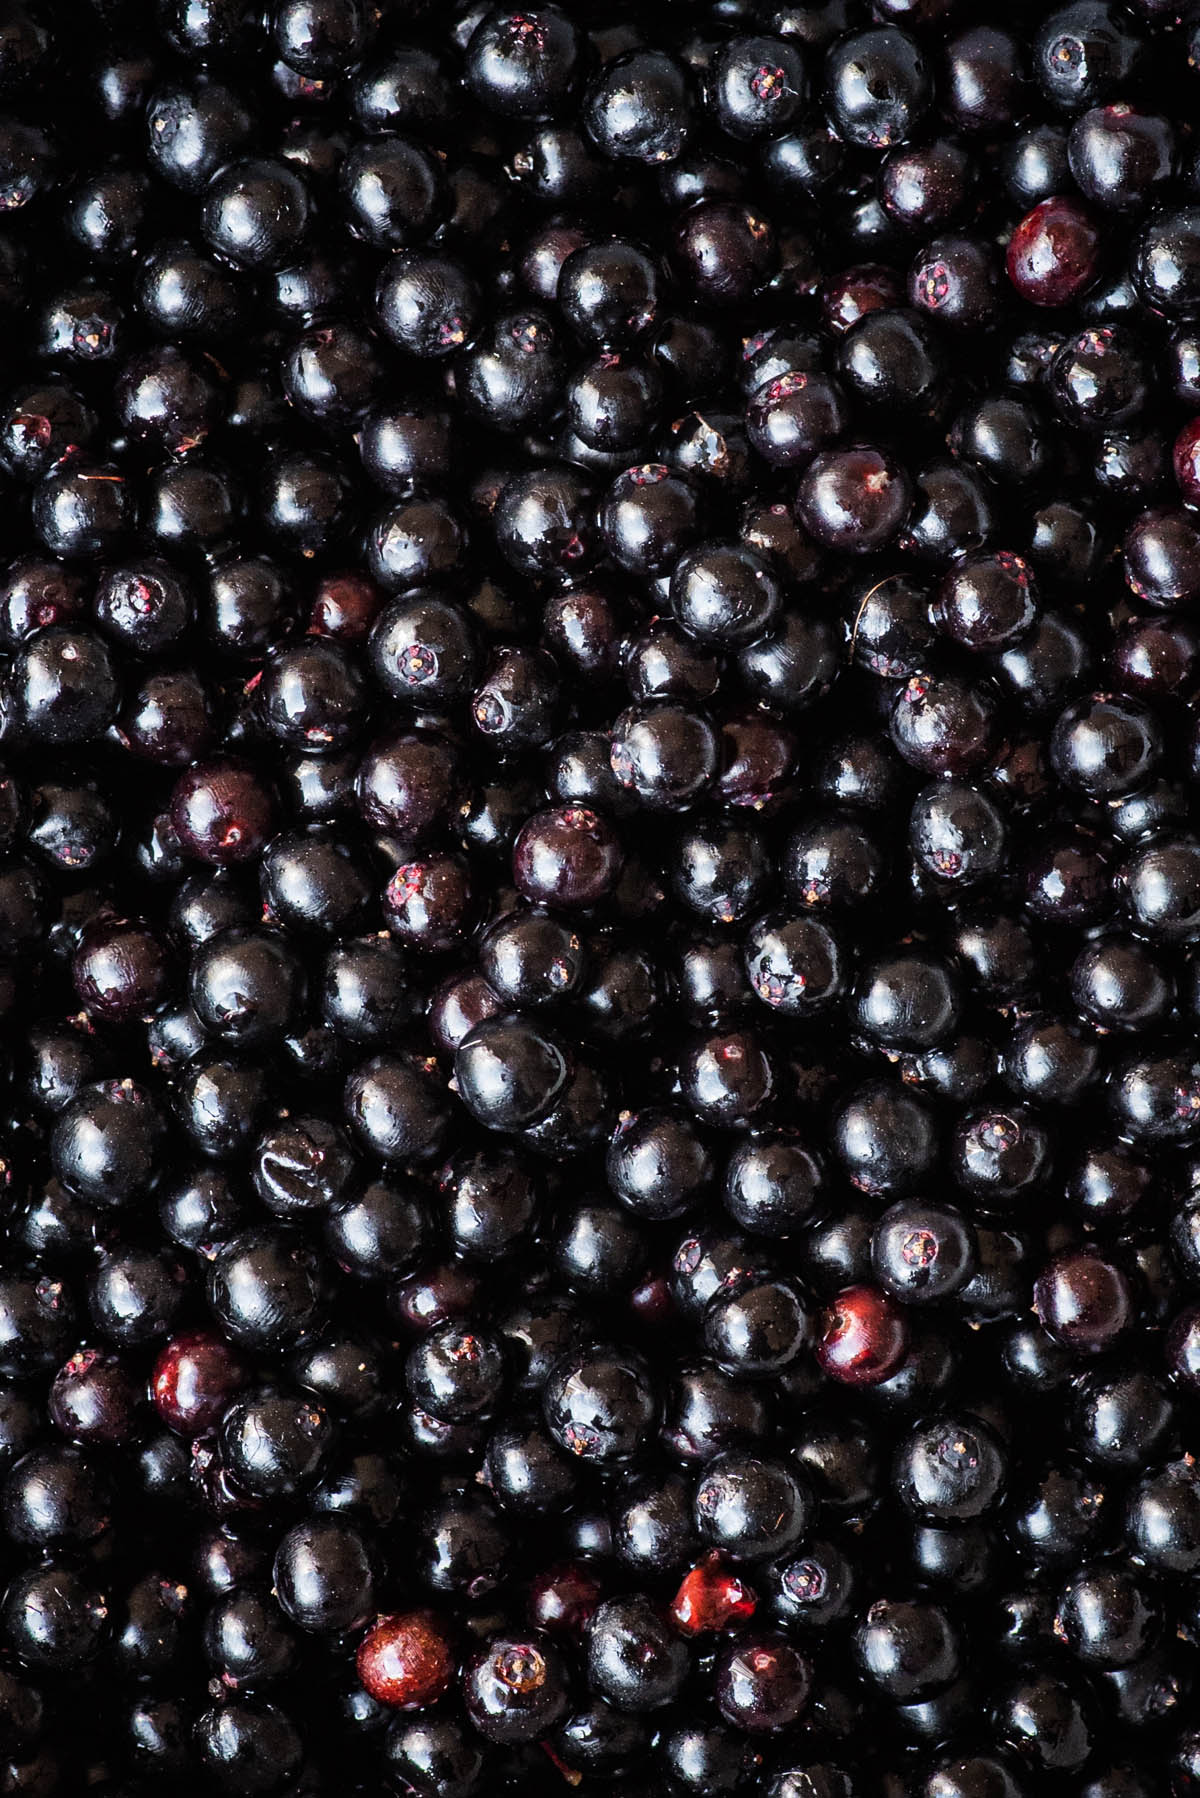 Close up of berries after being removed from the stems.